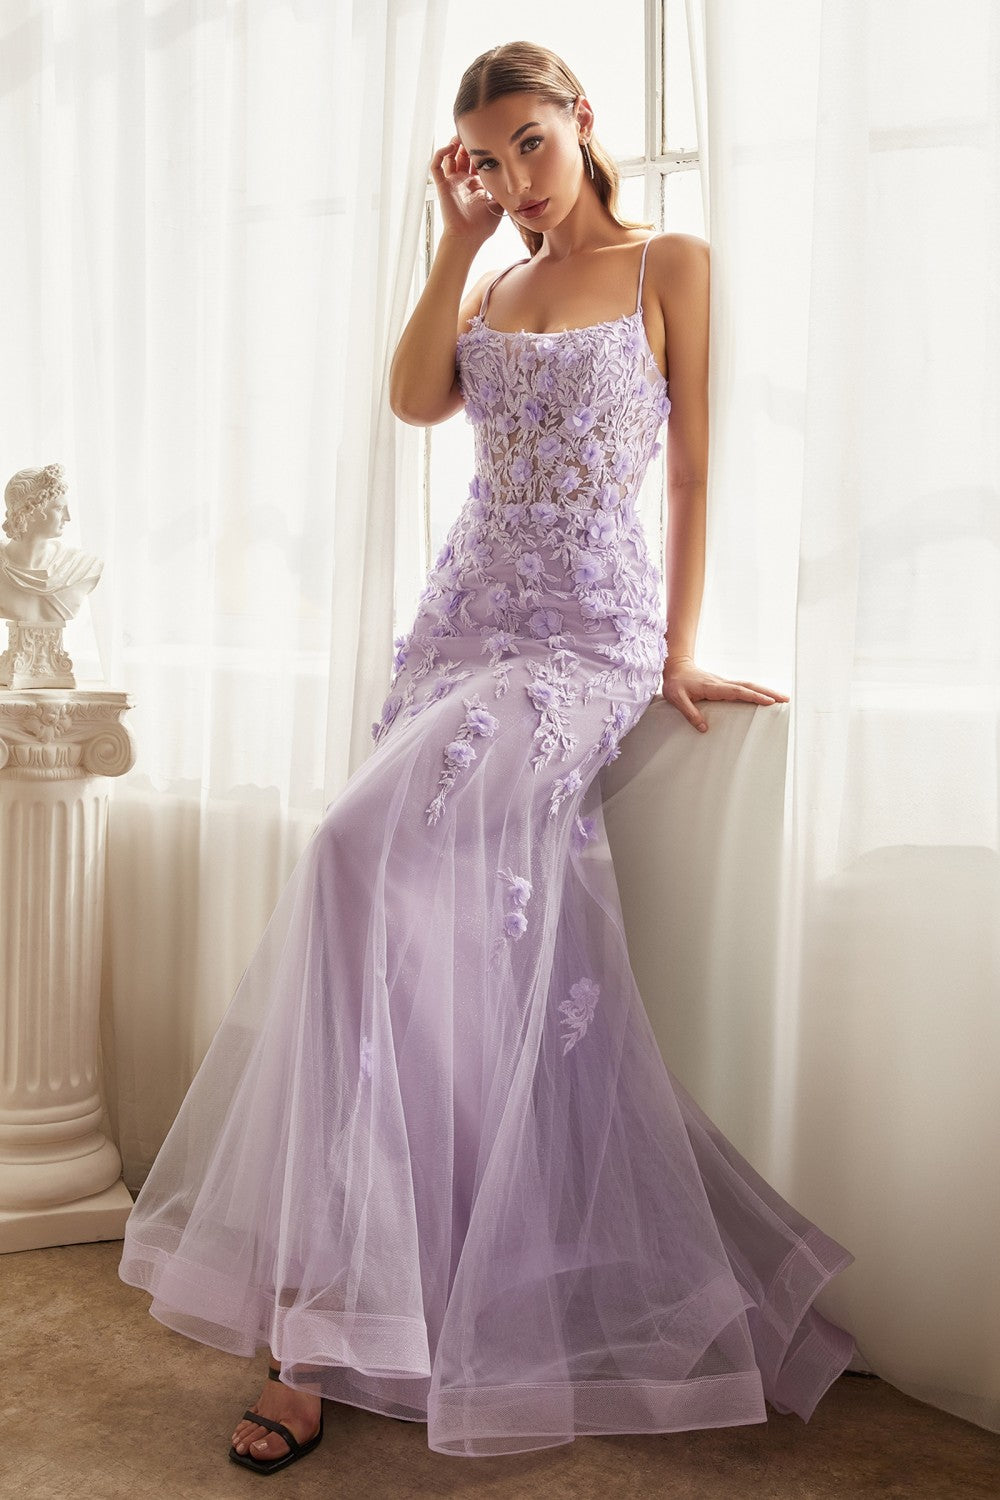 Lavender Fitted Floral Mermaid Gown CD995 - Women Evening Formal Gown - Special Occasion